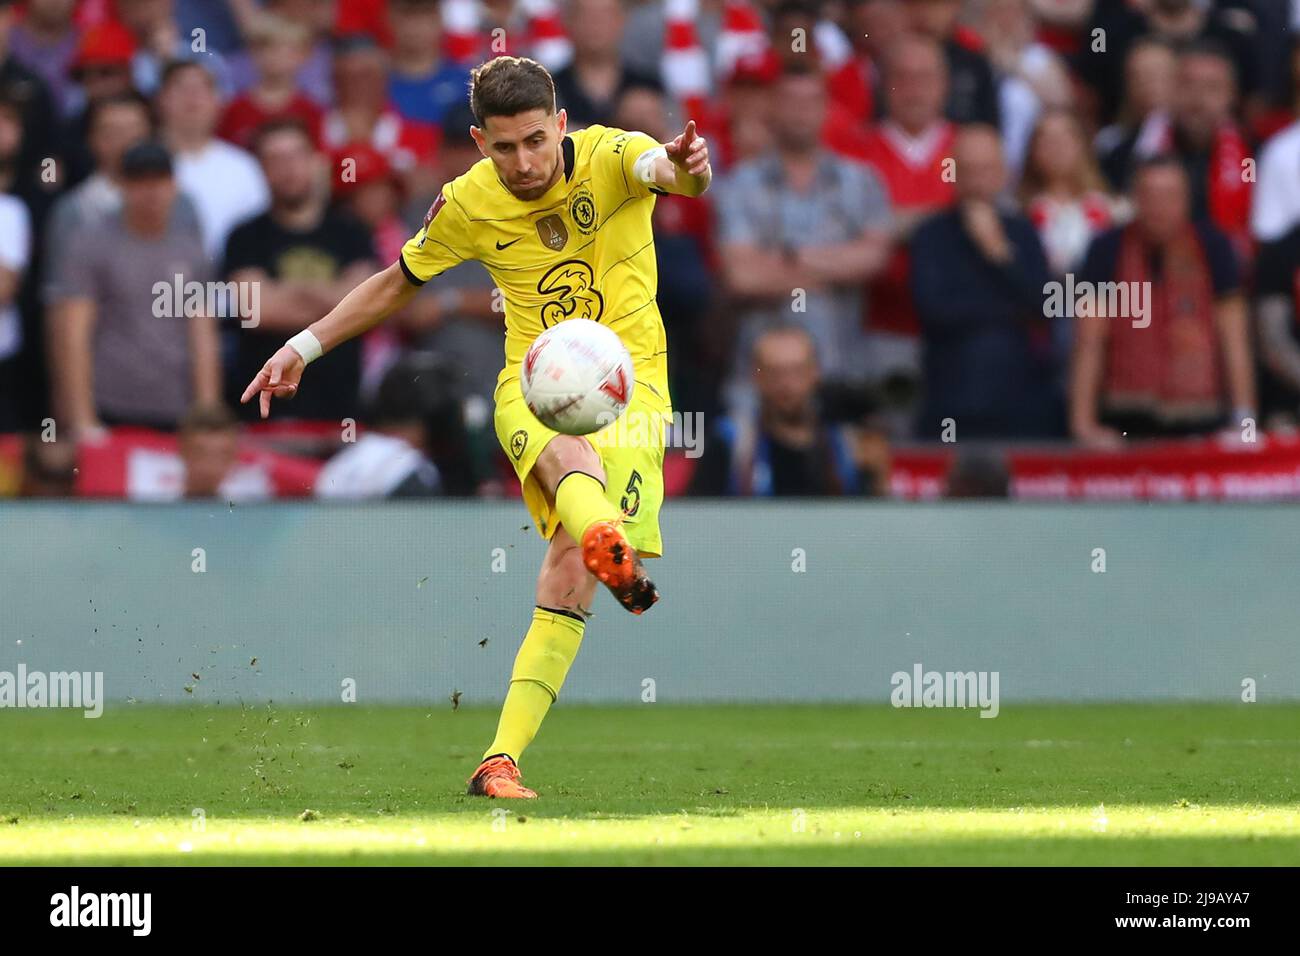 Jorginho of Chelsea - Chelsea v Liverpool, The Emirates FA Cup Final, Wembley Stadium, London - 14th May 2022  Editorial Use Only Stock Photo